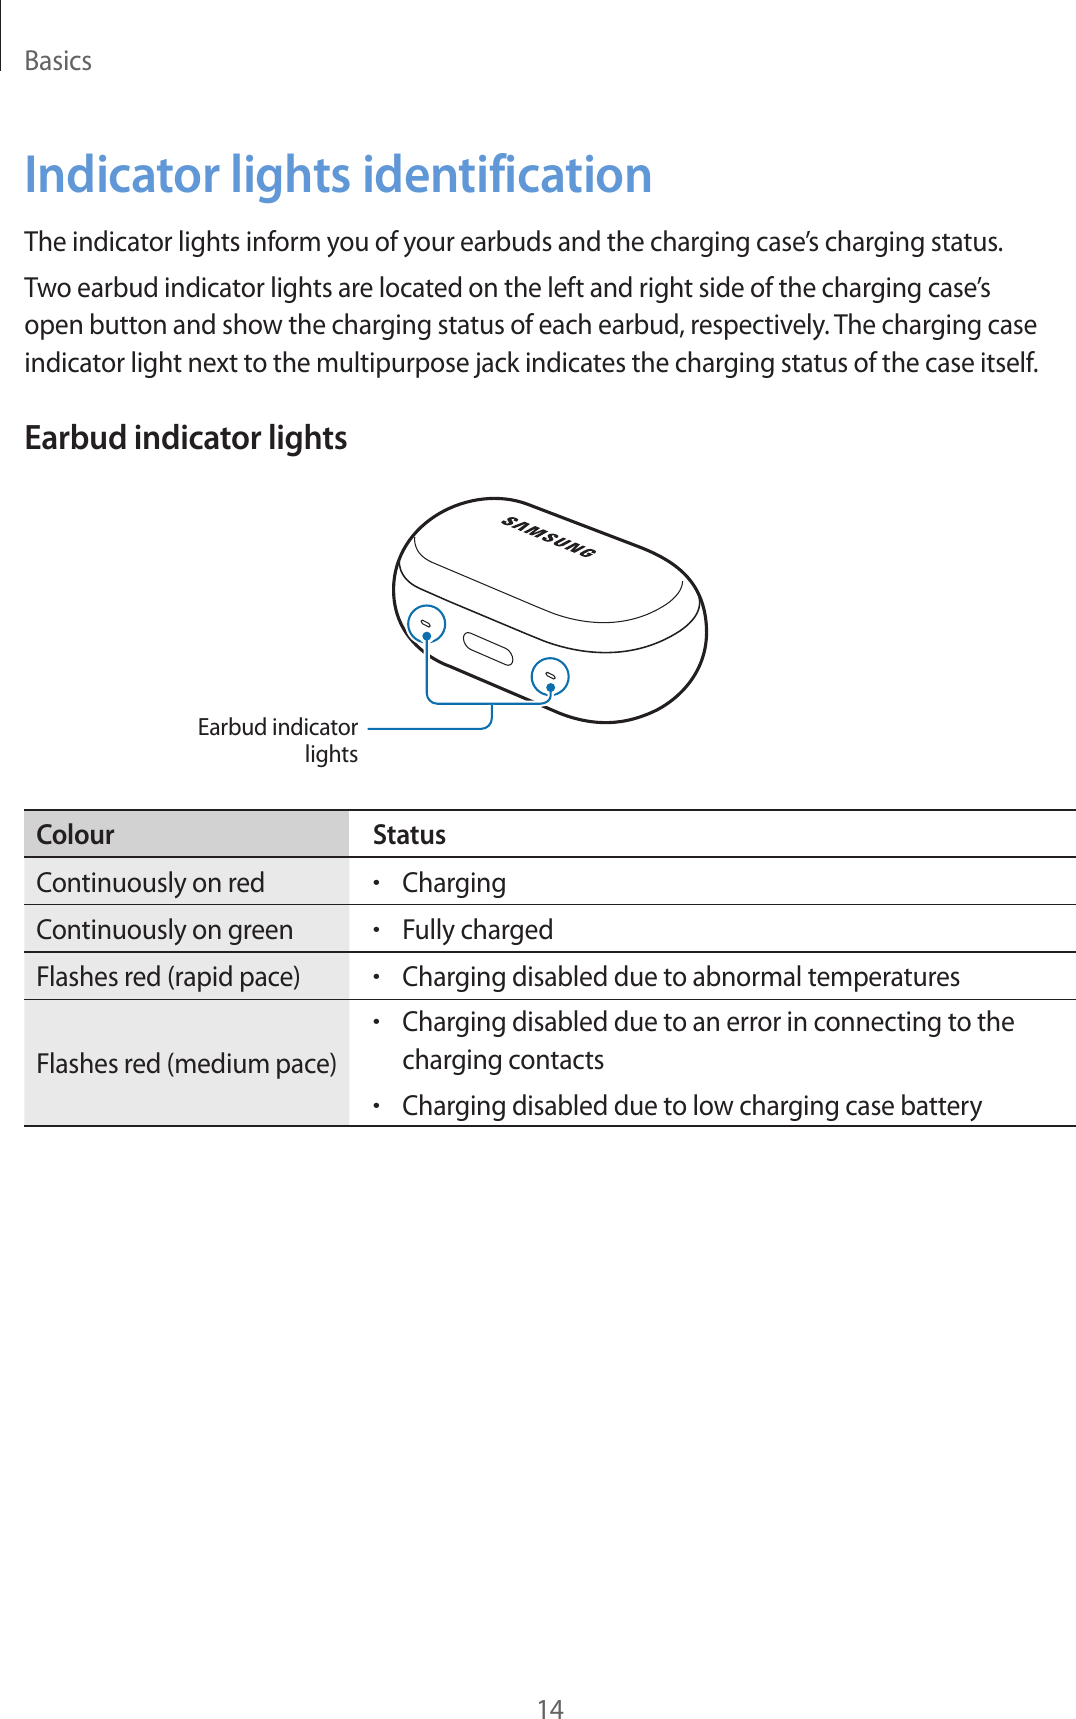 Basics14Indicator lights identificationThe indicator lights inform you of your earbuds and the charging case’s charging status.Two earbud indicator lights are located on the left and right side of the charging case’s open button and show the charging status of each earbud, respectively. The charging case indicator light next to the multipurpose jack indicates the charging status of the case itself.Earbud indicator lightsEarbud indicator lightsColour StatusContinuously on red•ChargingContinuously on green•Fully chargedFlashes red (rapid pace)•Charging disabled due to abnormal temperaturesFlashes red (medium pace)•Charging disabled due to an error in connecting to the charging contacts•Charging disabled due to low charging case battery